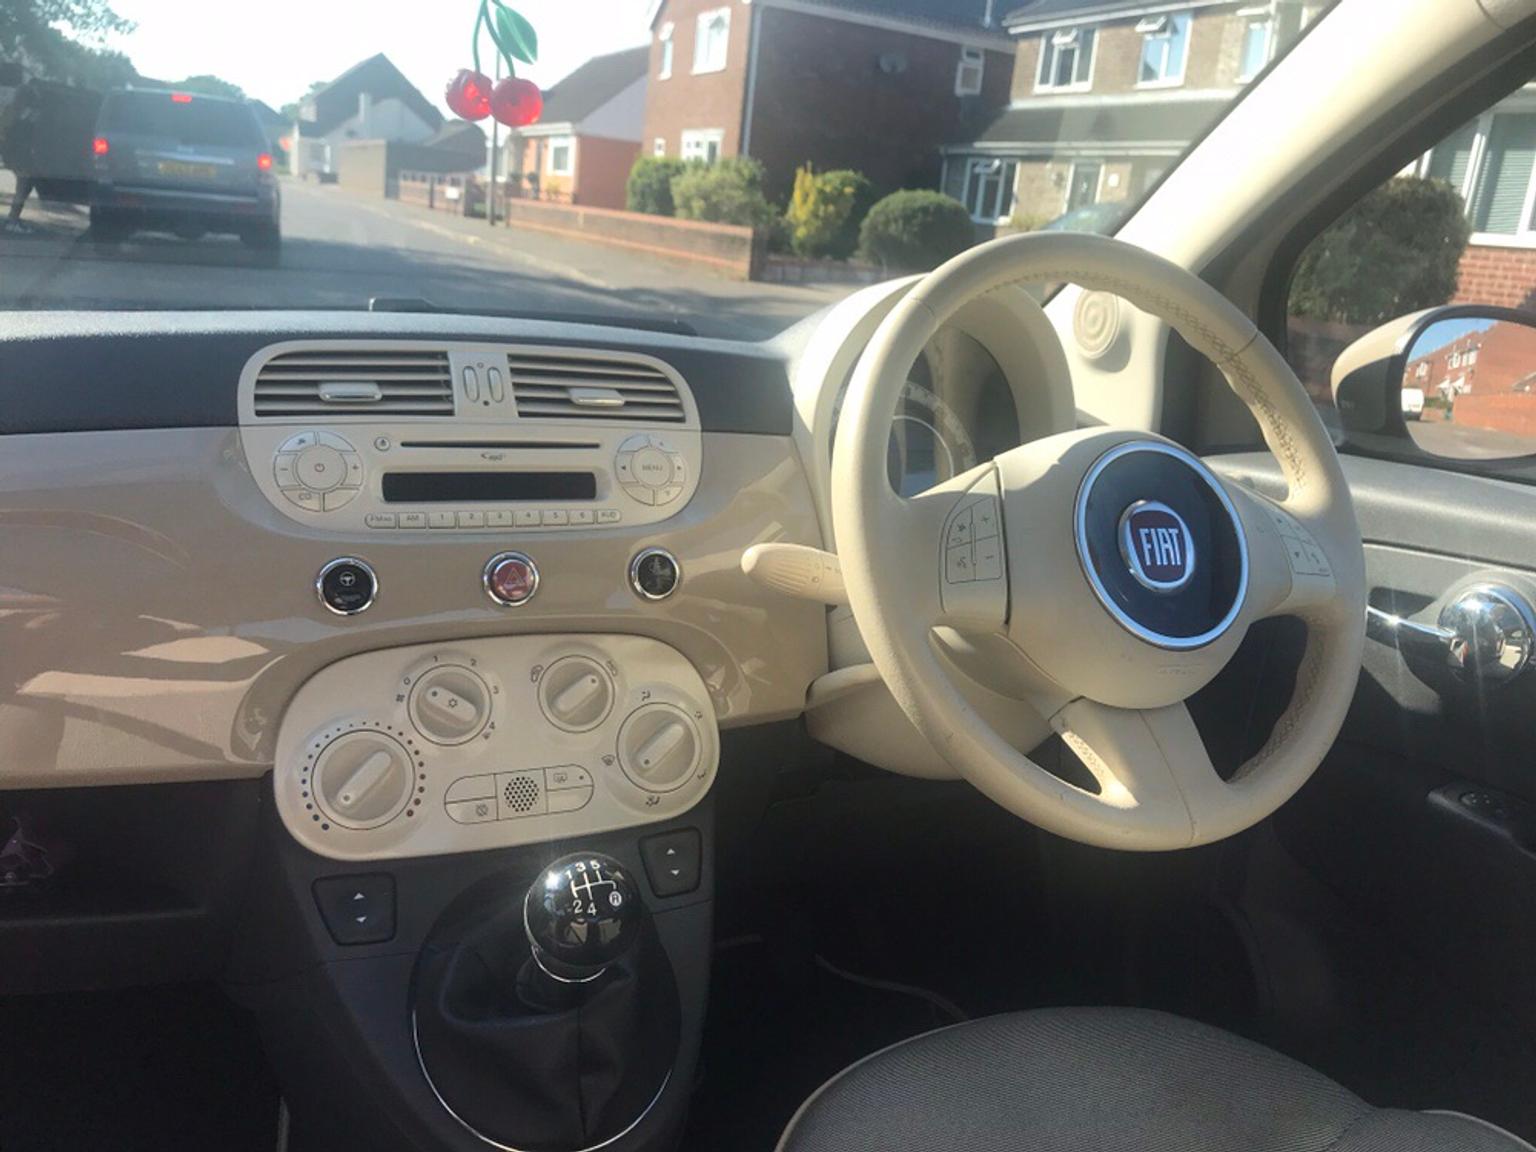 Fiat 500 1 2 Lounge In Co7 Colchester For 5 0 00 For Sale Shpock